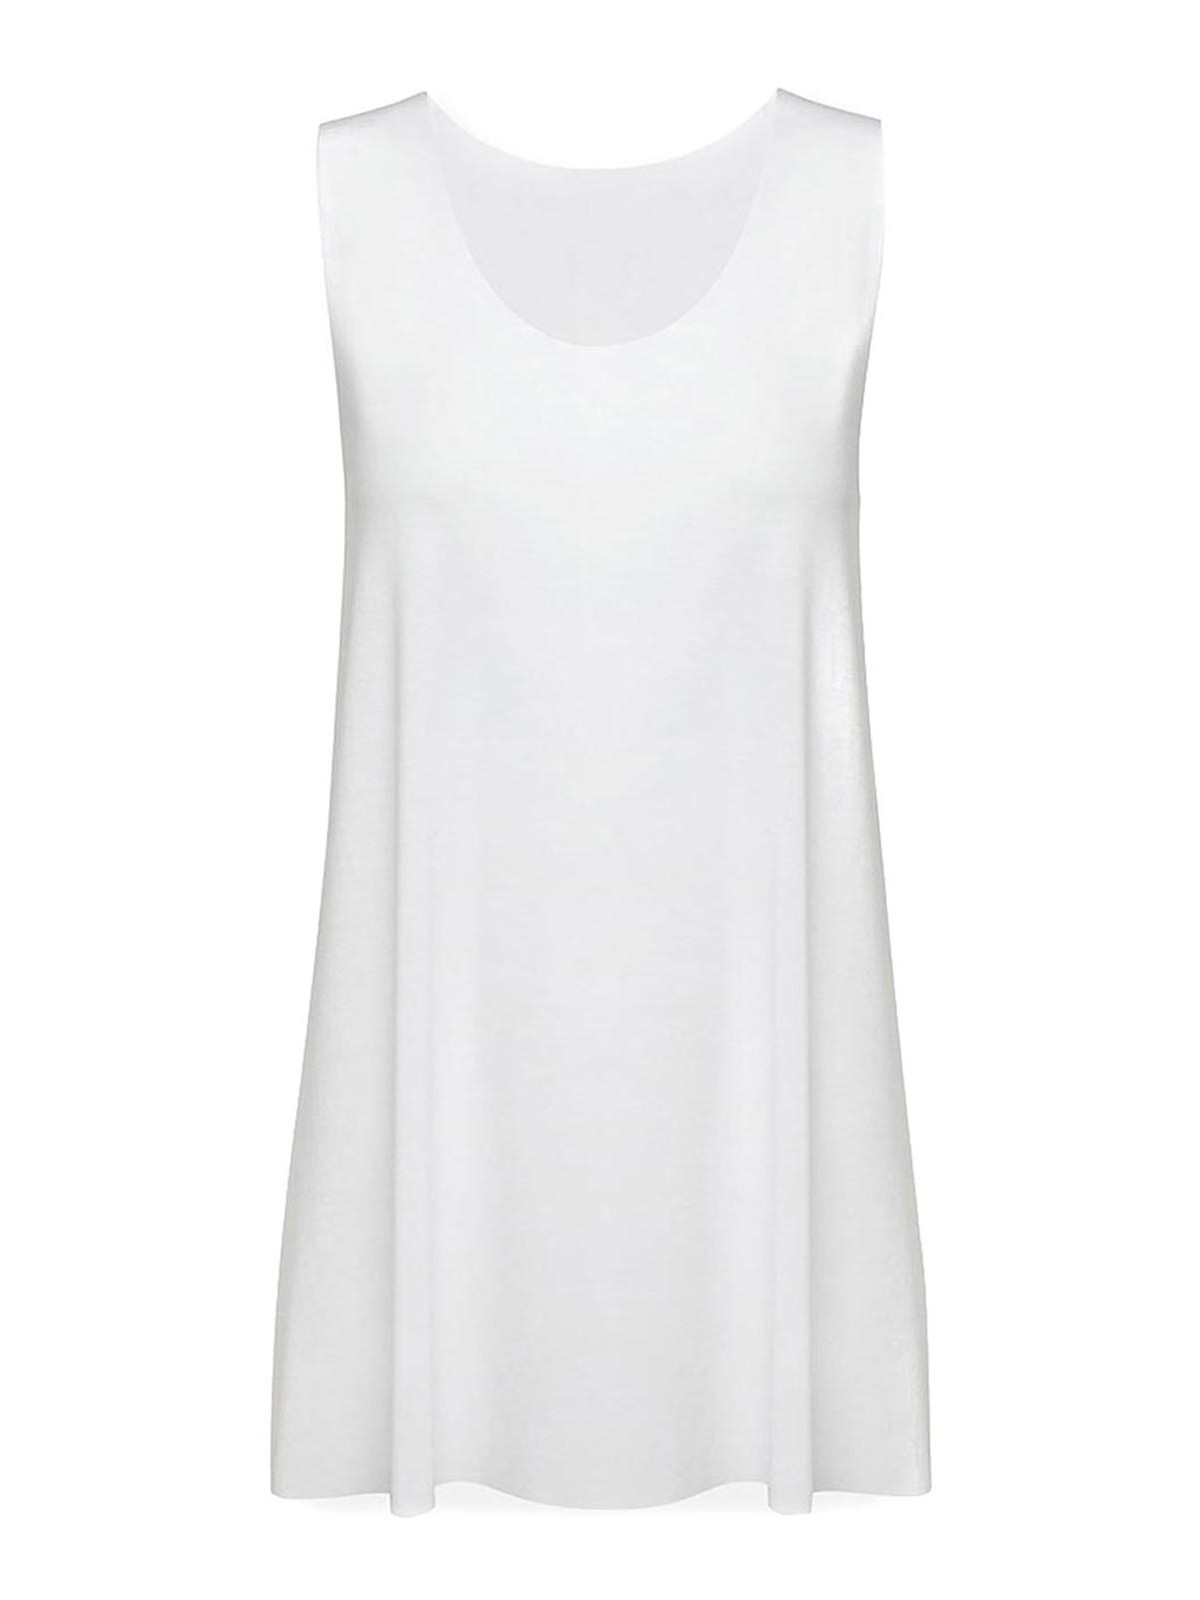 Wolford Aurora Pure Top Sleeveless In White